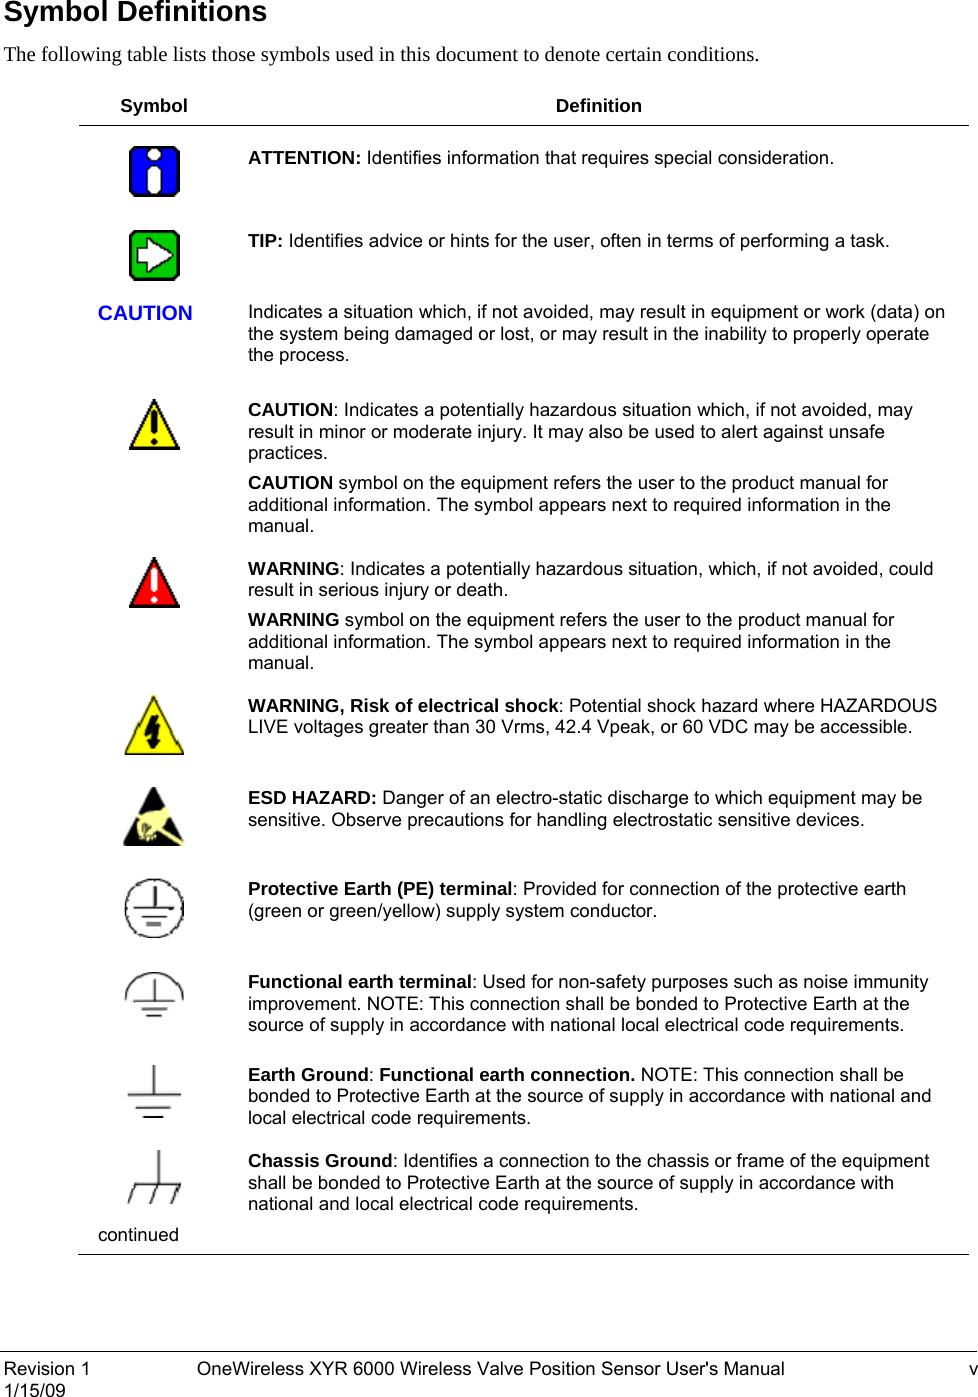  Symbol Definitions The following table lists those symbols used in this document to denote certain conditions.  Symbol Definition     ATTENTION: Identifies information that requires special consideration.     TIP: Identifies advice or hints for the user, often in terms of performing a task.   CAUTION  Indicates a situation which, if not avoided, may result in equipment or work (data) on the system being damaged or lost, or may result in the inability to properly operate the process.      CAUTION: Indicates a potentially hazardous situation which, if not avoided, may result in minor or moderate injury. It may also be used to alert against unsafe practices.  CAUTION symbol on the equipment refers the user to the product manual for additional information. The symbol appears next to required information in the manual.     WARNING: Indicates a potentially hazardous situation, which, if not avoided, could result in serious injury or death. WARNING symbol on the equipment refers the user to the product manual for additional information. The symbol appears next to required information in the manual.      WARNING, Risk of electrical shock: Potential shock hazard where HAZARDOUS LIVE voltages greater than 30 Vrms, 42.4 Vpeak, or 60 VDC may be accessible.     ESD HAZARD: Danger of an electro-static discharge to which equipment may be sensitive. Observe precautions for handling electrostatic sensitive devices.     Protective Earth (PE) terminal: Provided for connection of the protective earth (green or green/yellow) supply system conductor.     Functional earth terminal: Used for non-safety purposes such as noise immunity improvement. NOTE: This connection shall be bonded to Protective Earth at the source of supply in accordance with national local electrical code requirements.     Earth Ground: Functional earth connection. NOTE: This connection shall be bonded to Protective Earth at the source of supply in accordance with national and local electrical code requirements.    Chassis Ground: Identifies a connection to the chassis or frame of the equipment shall be bonded to Protective Earth at the source of supply in accordance with national and local electrical code requirements. continued    Revision 1  OneWireless XYR 6000 Wireless Valve Position Sensor User&apos;s Manual  v 1/15/09  